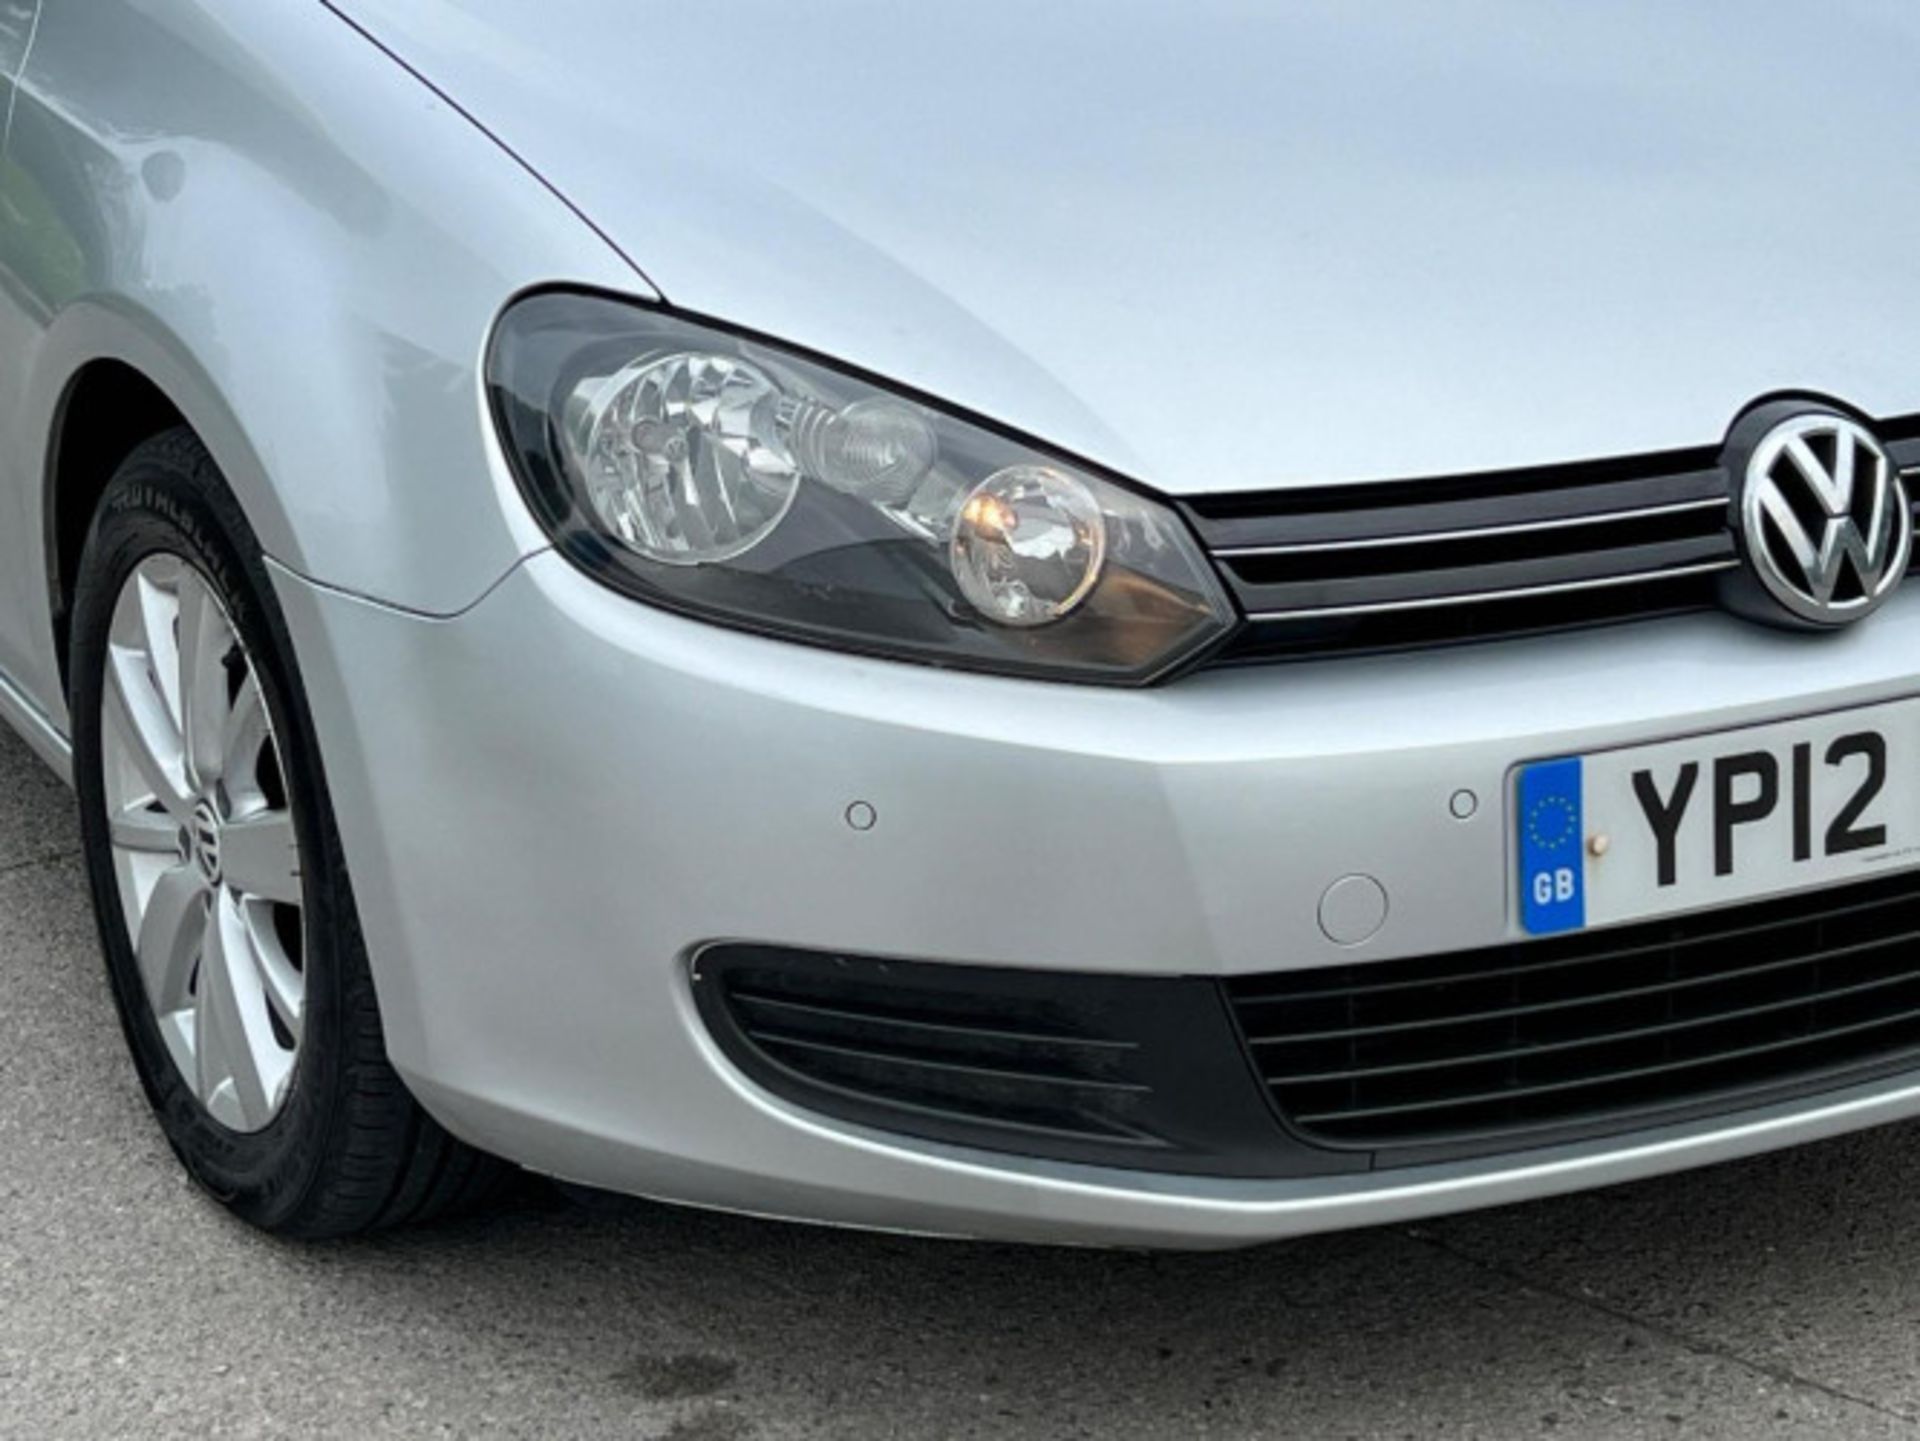 IMPECCABLE 2012 VOLKSWAGEN GOLF 1.6 TDI MATCH >>--NO VAT ON HAMMER--<< - Image 113 of 116